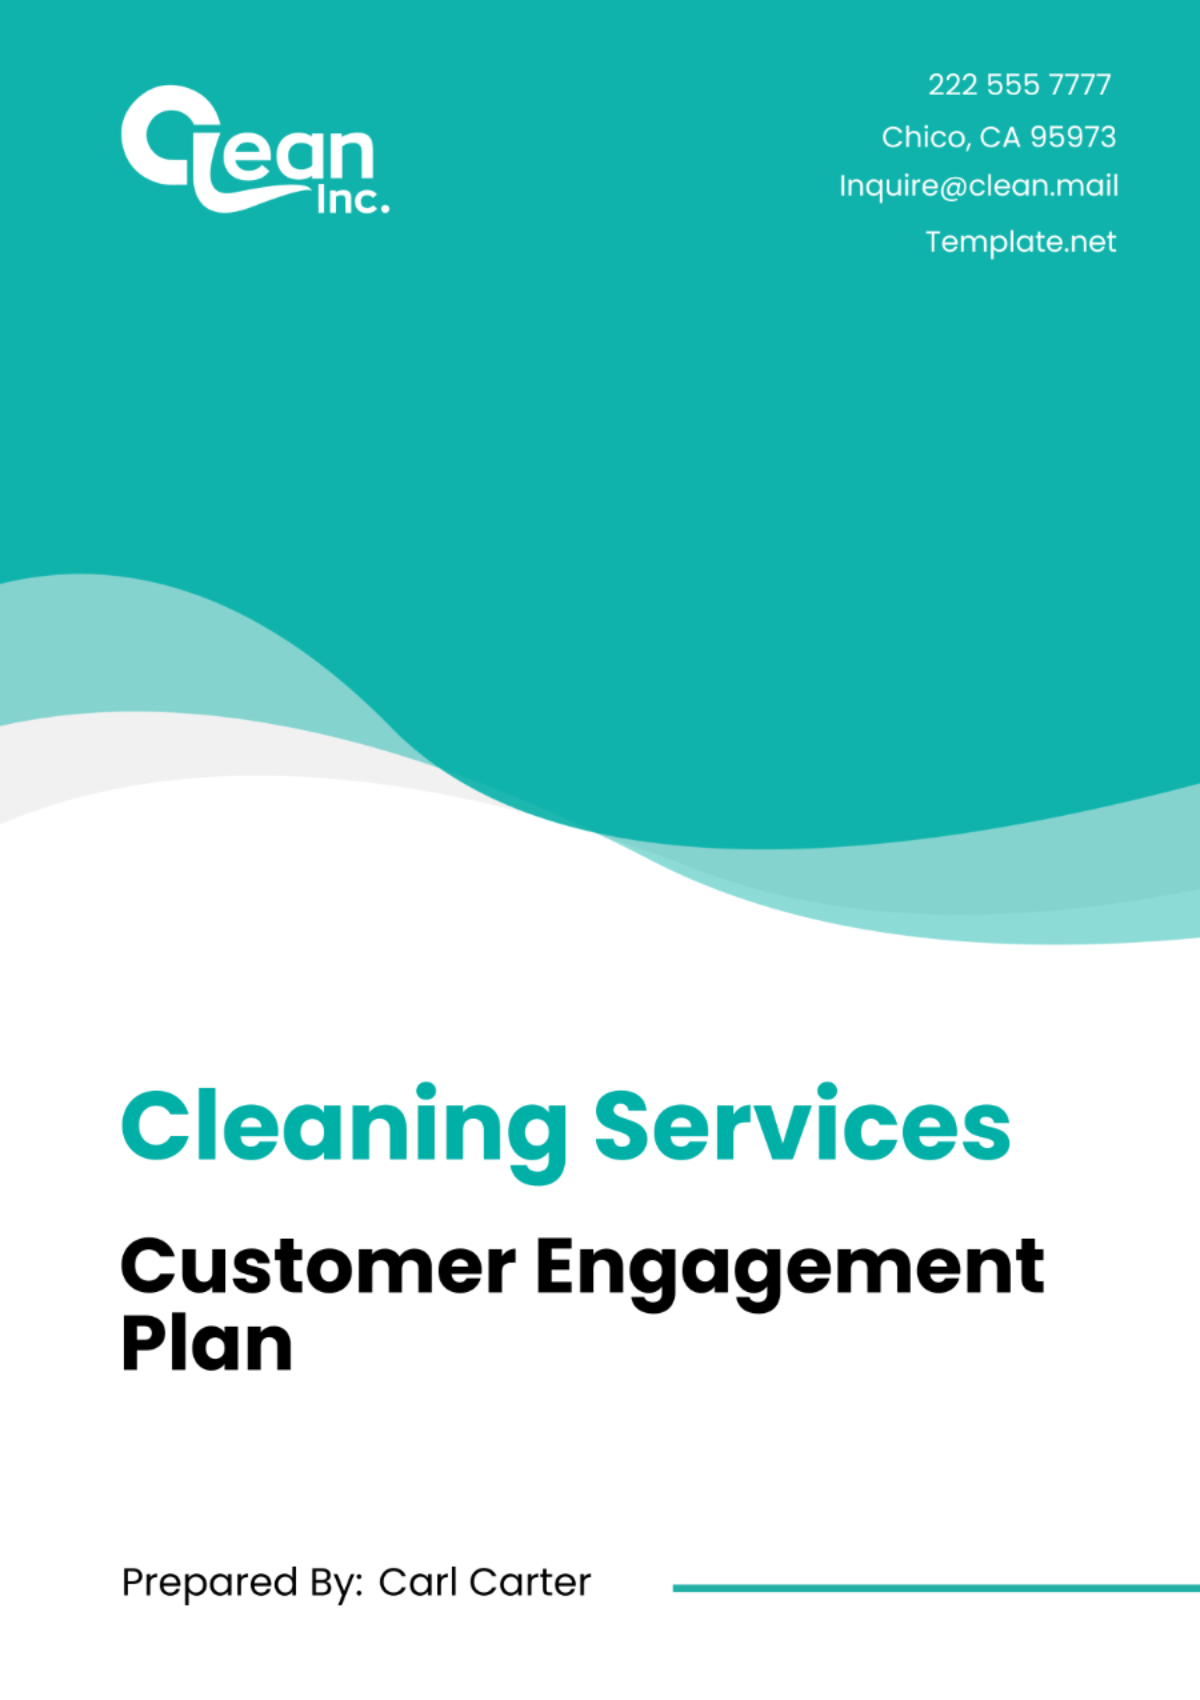 Cleaning Services Customer Engagement Plan Template